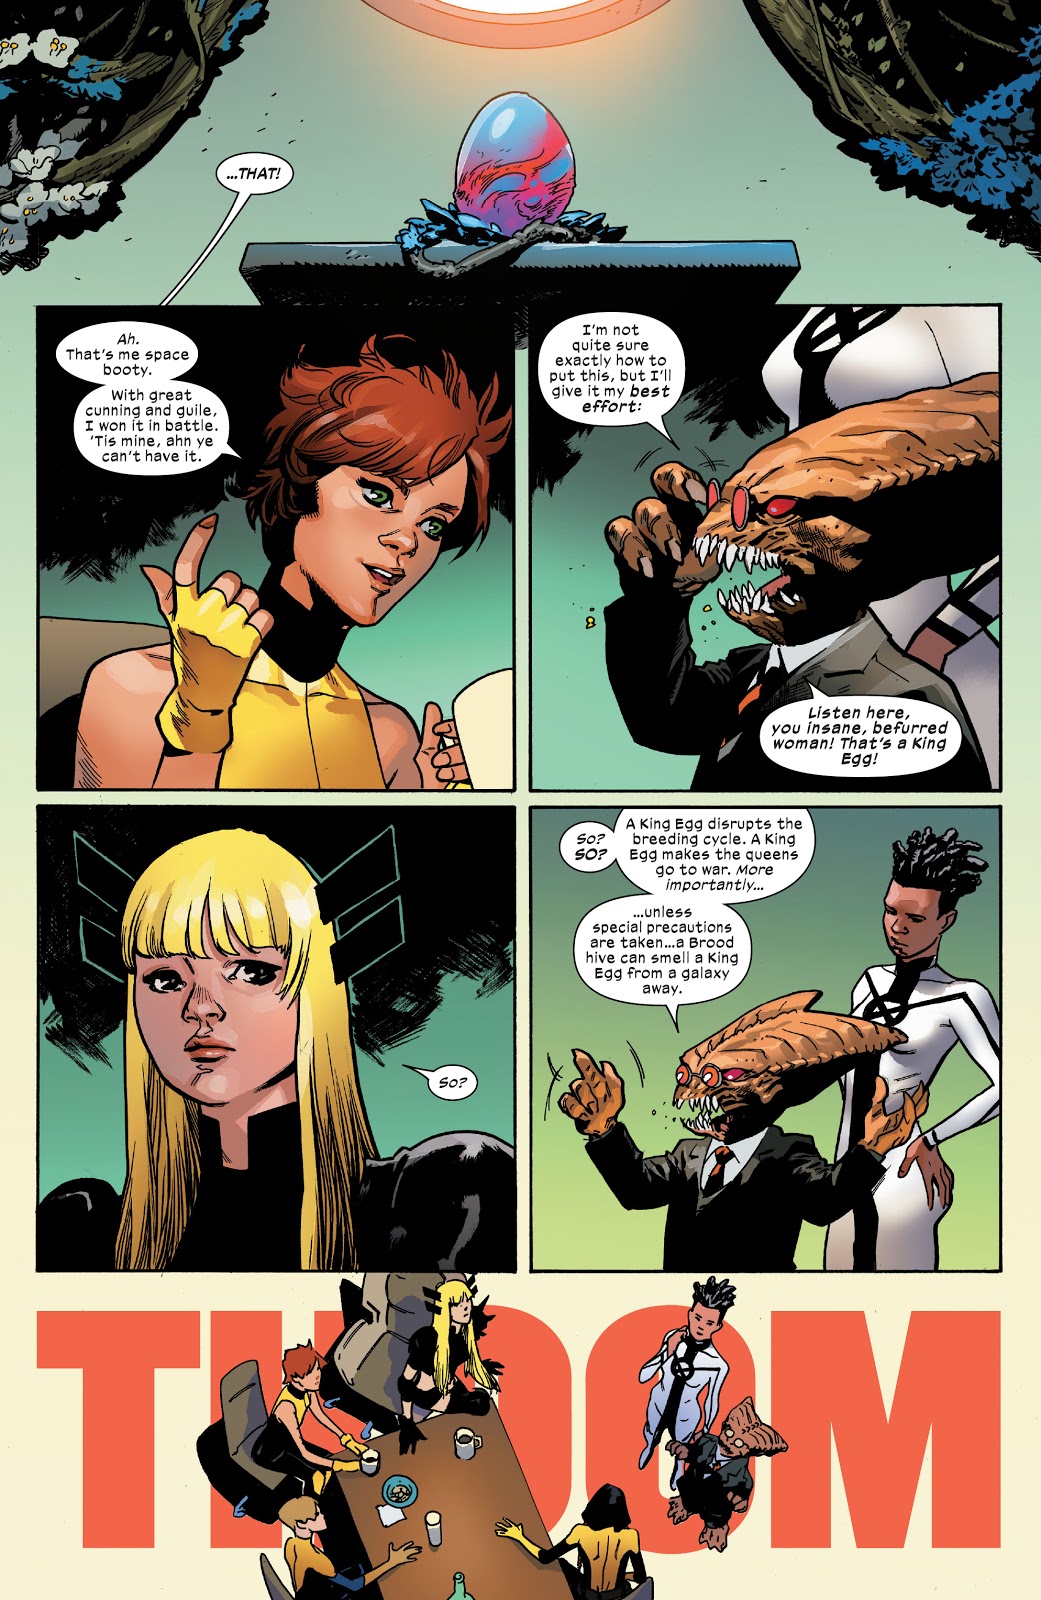 Cyclops And Magik Tag Team Against The Brood